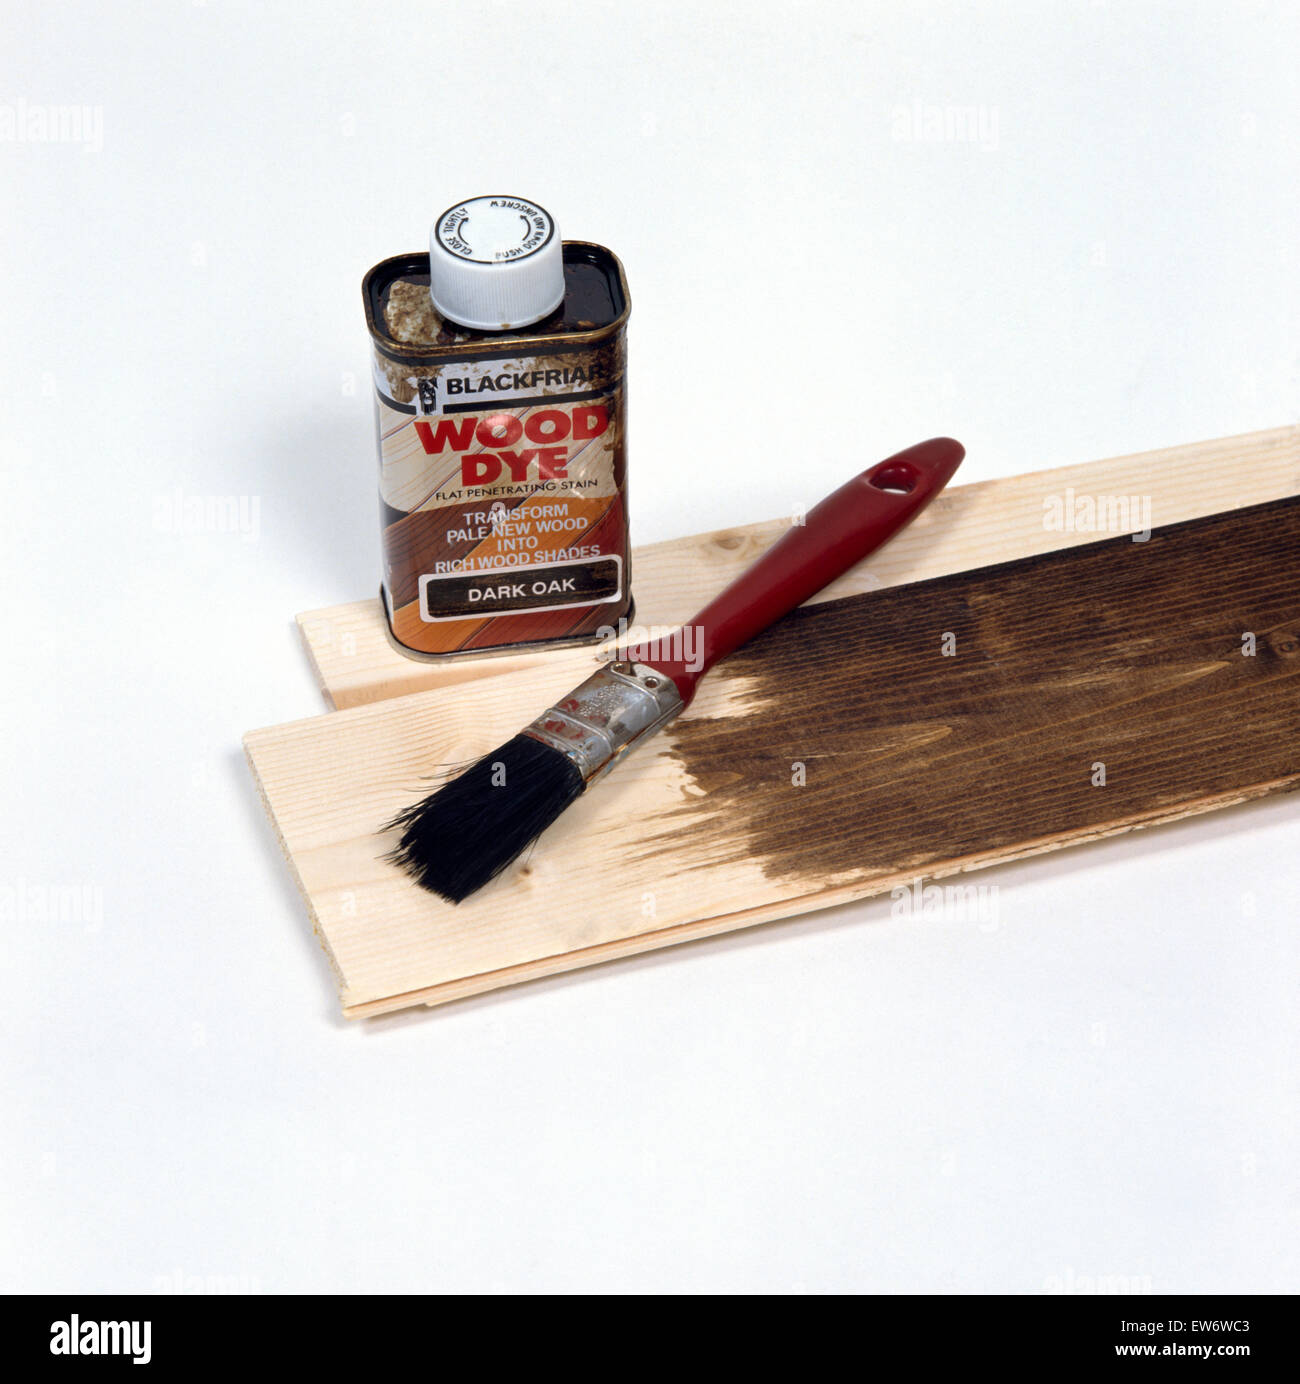 Stain Your Wood Purple Using Red Cabbage  Staining wood, Purple wood stain,  Diy wood stain